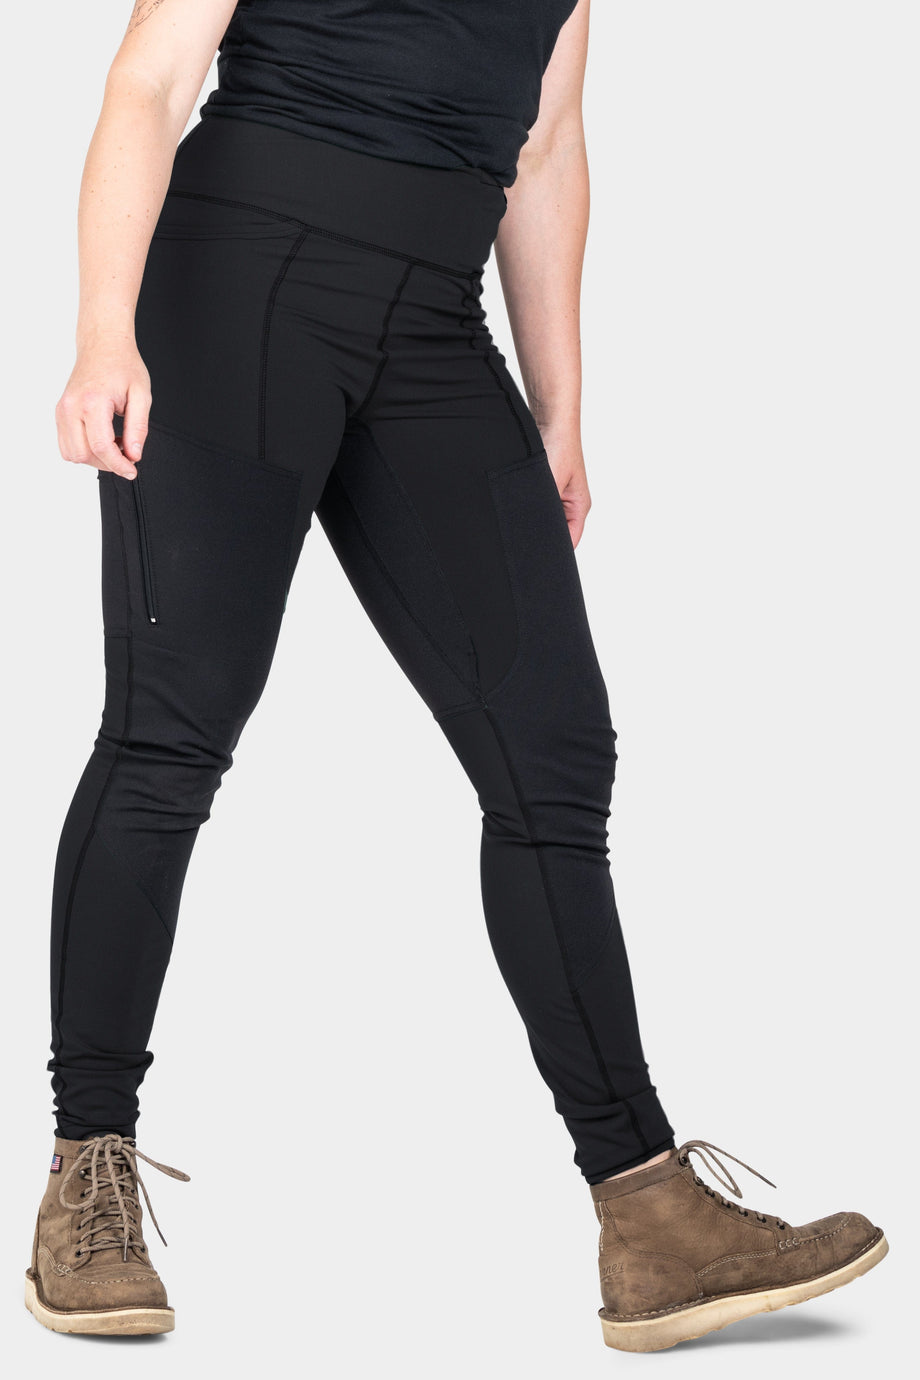 Topshop Tall full length heavy weight legging with deep waistband in black